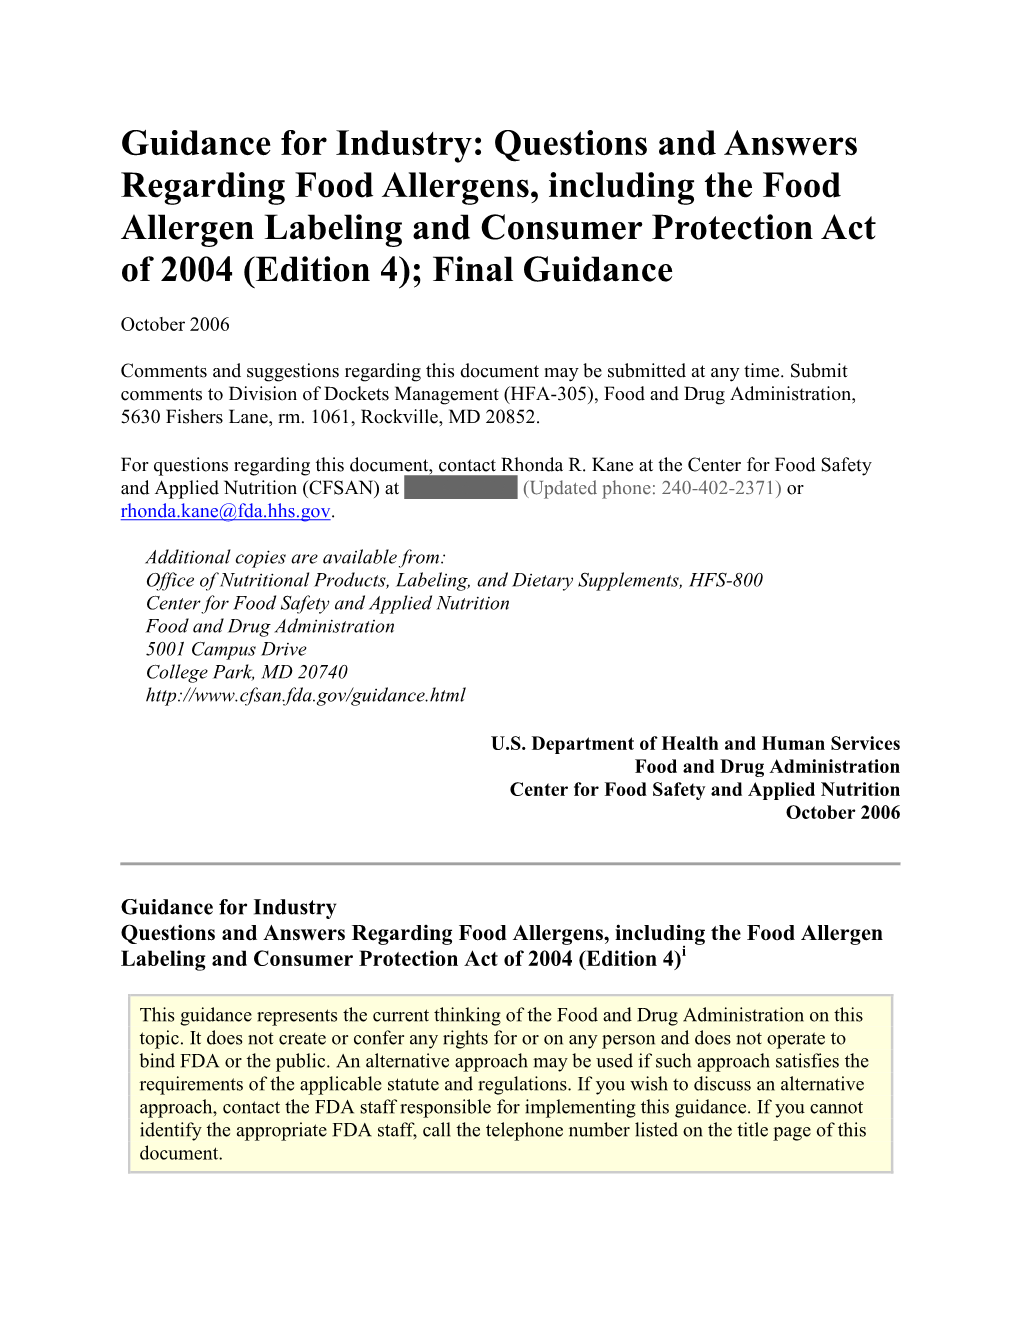 Guidance for Industry: Questions and Answers Regarding Food Allergens